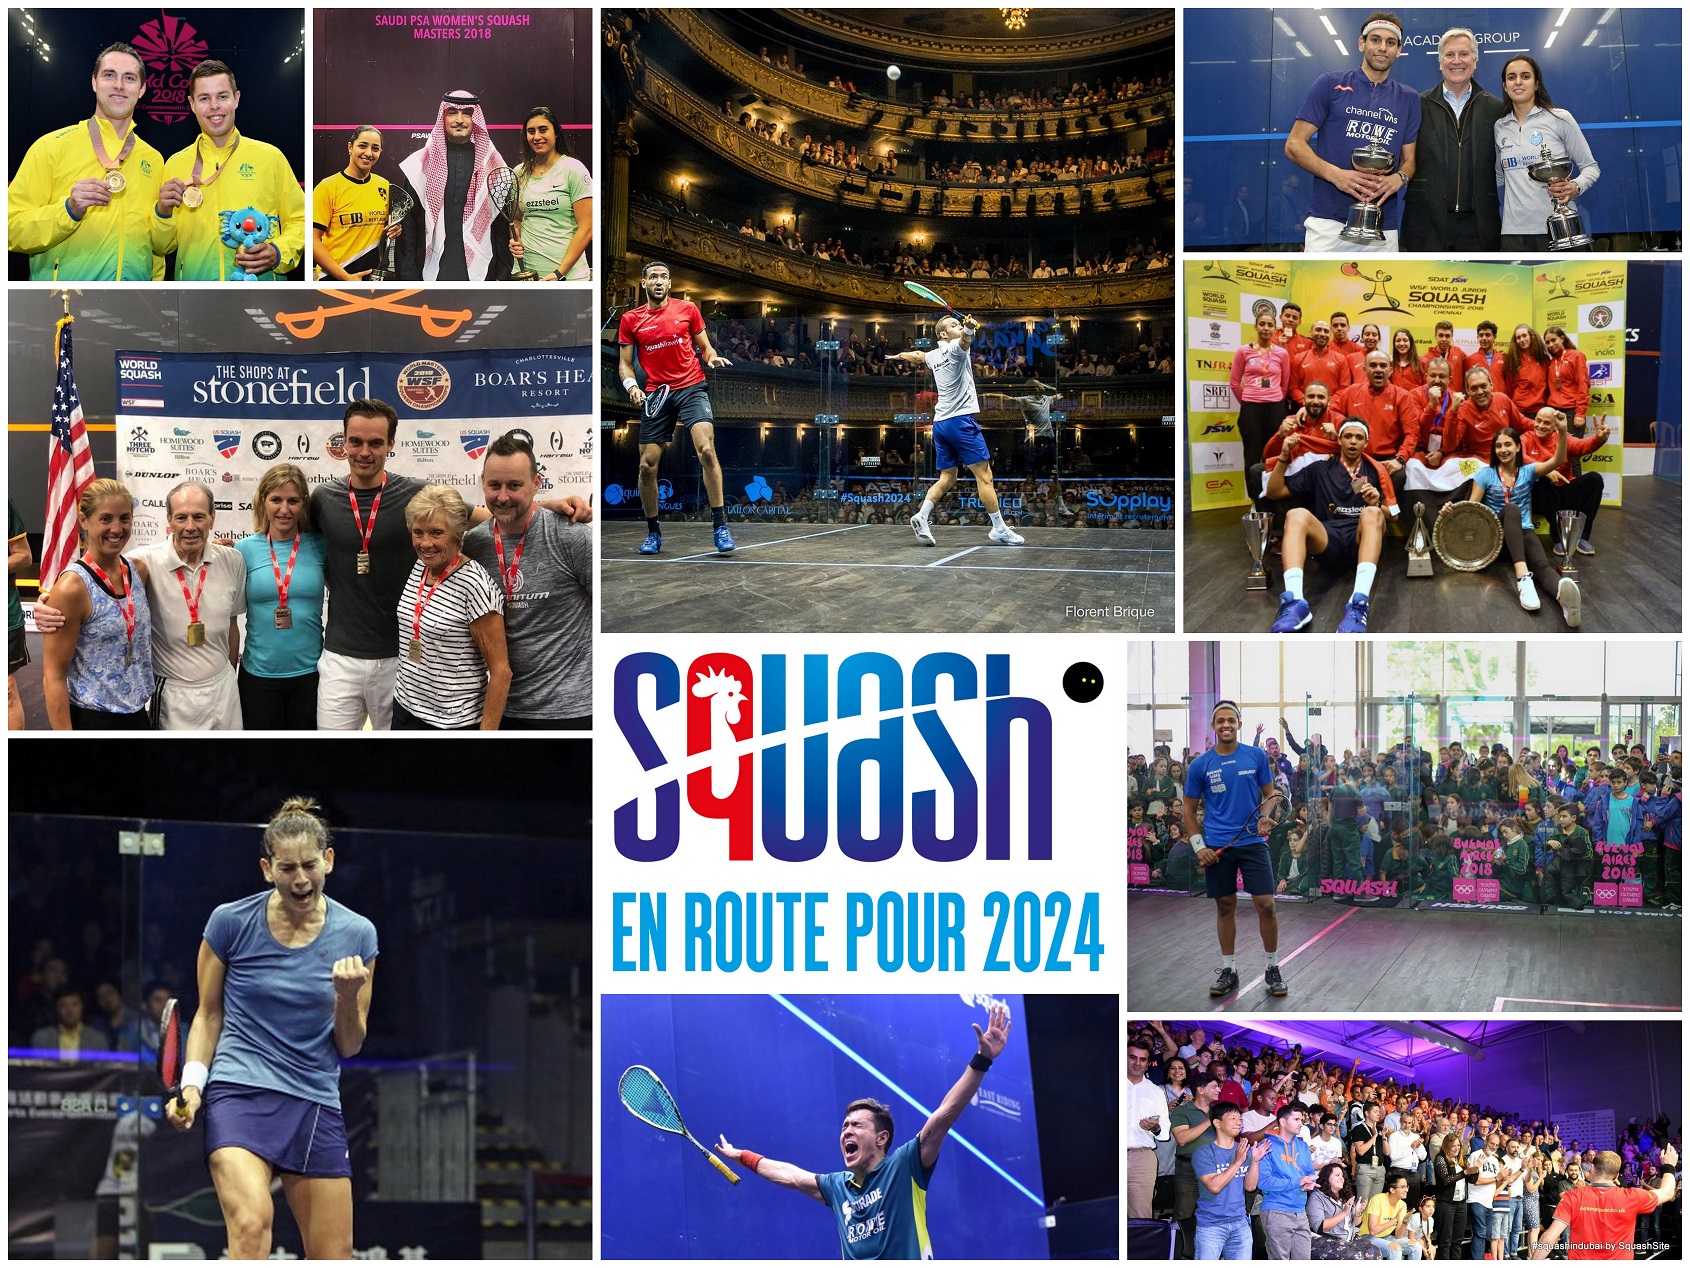 ROAD TO 2024: 2018, A YEAR OF SQUASH